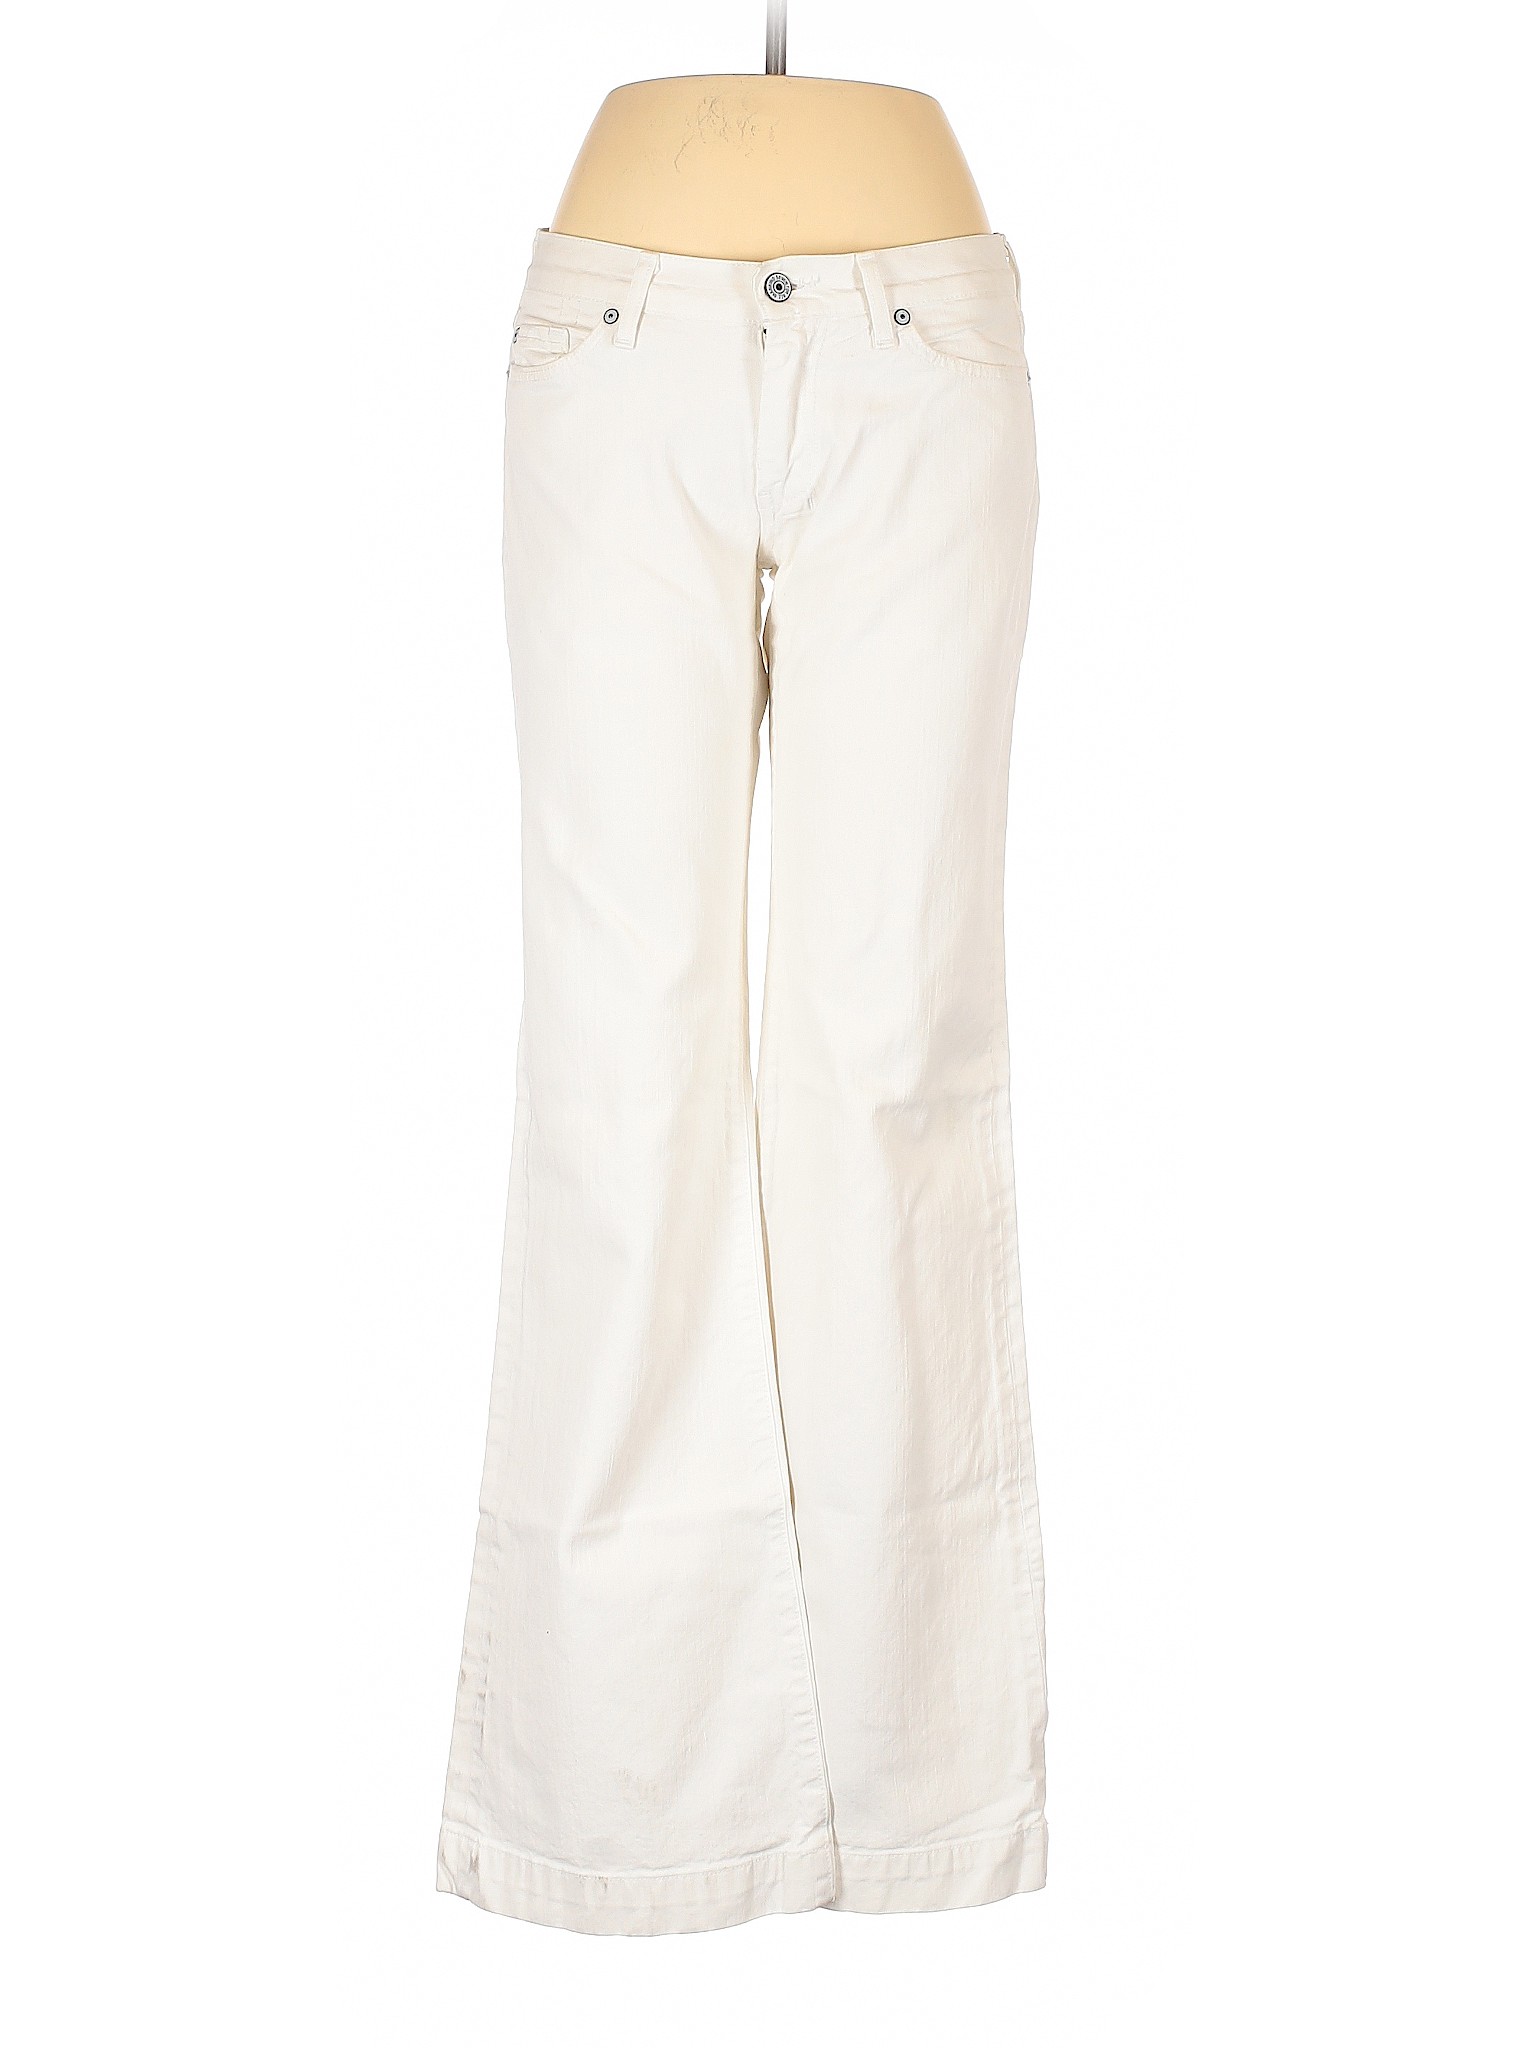 7 for all mankind white jeans